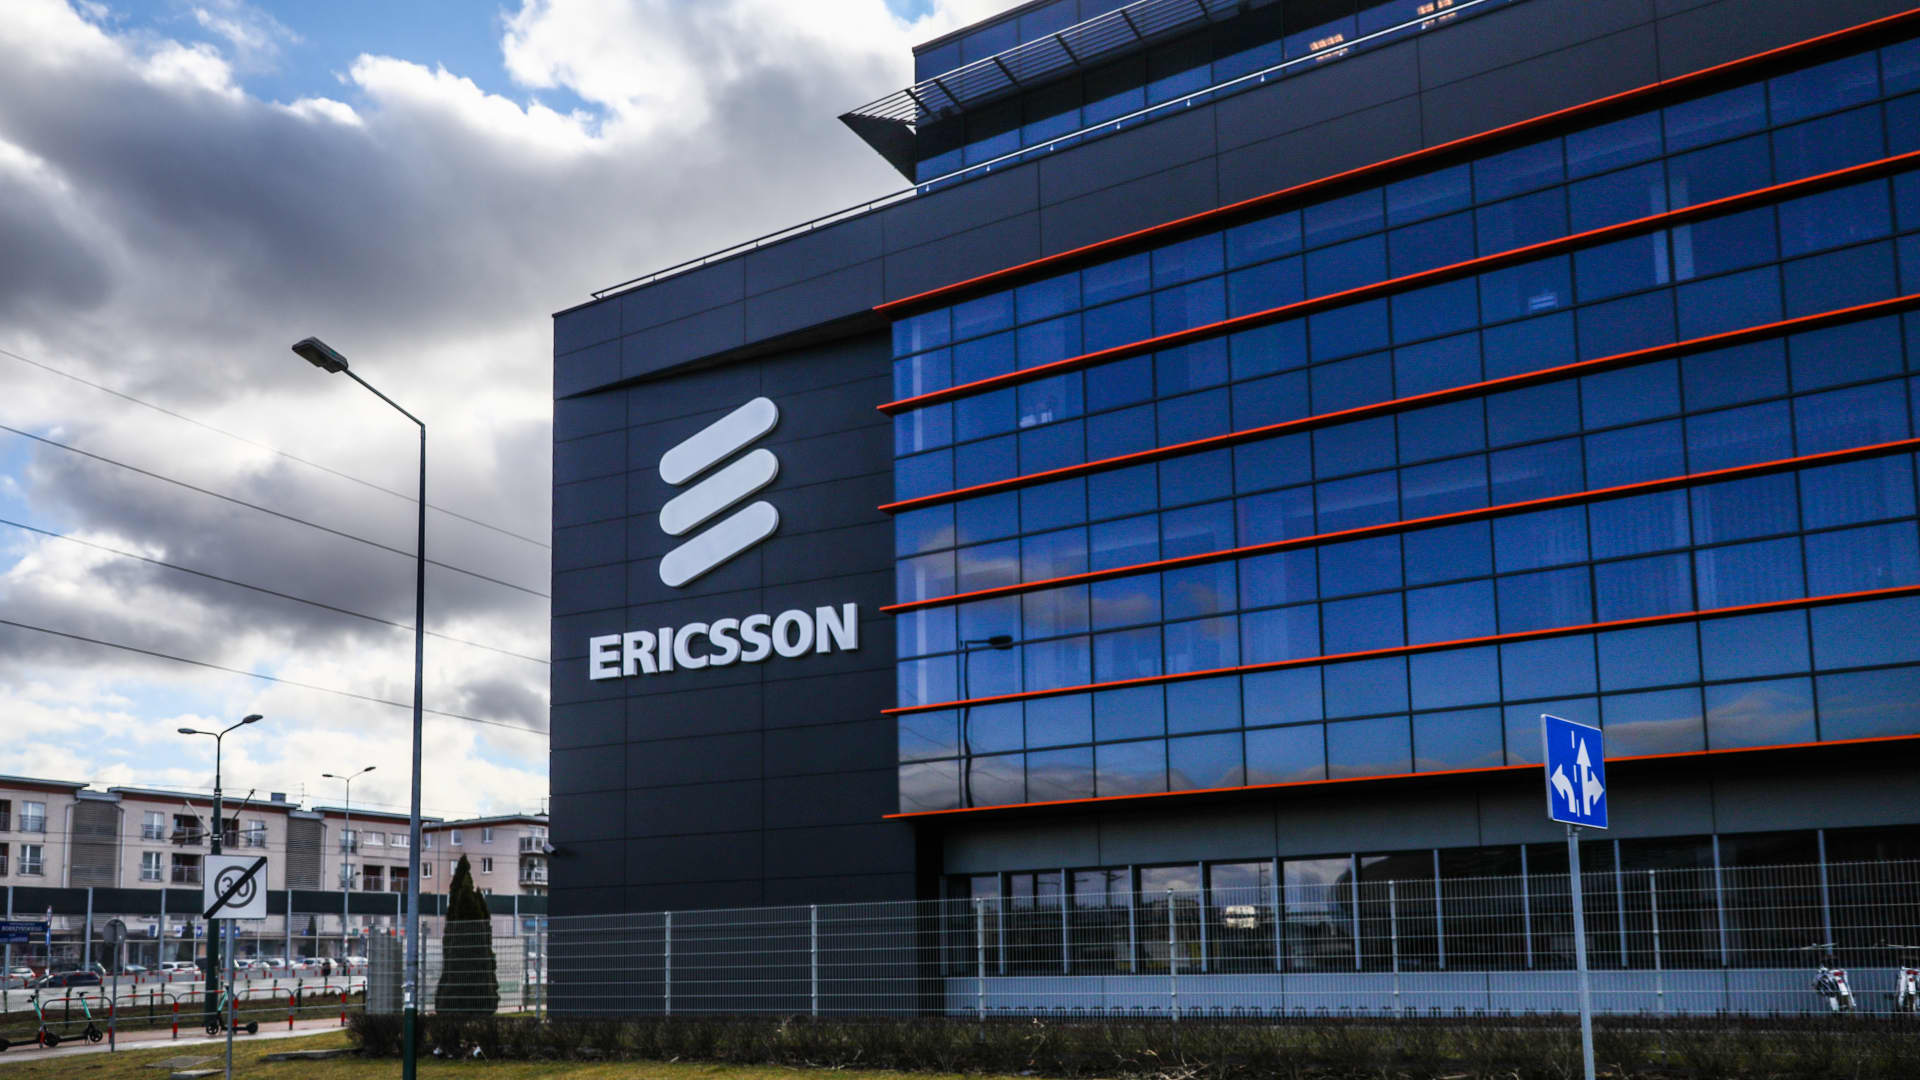 Ericsson pleads guilty in U.S. to federal bribery violations, agrees to pay 6 million penalty